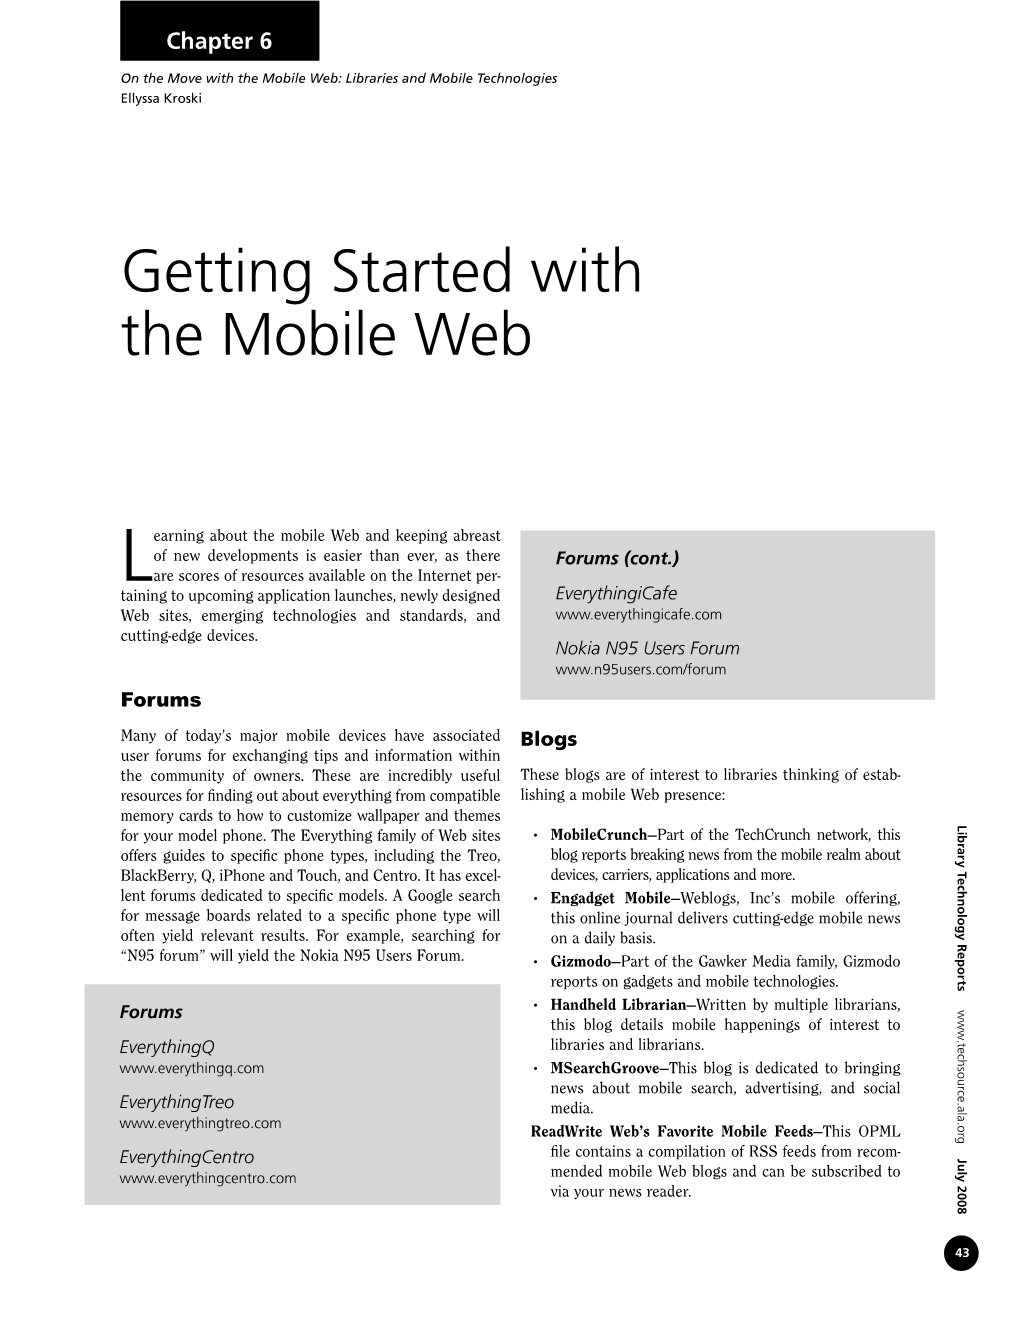 Getting Started with the Mobile Web